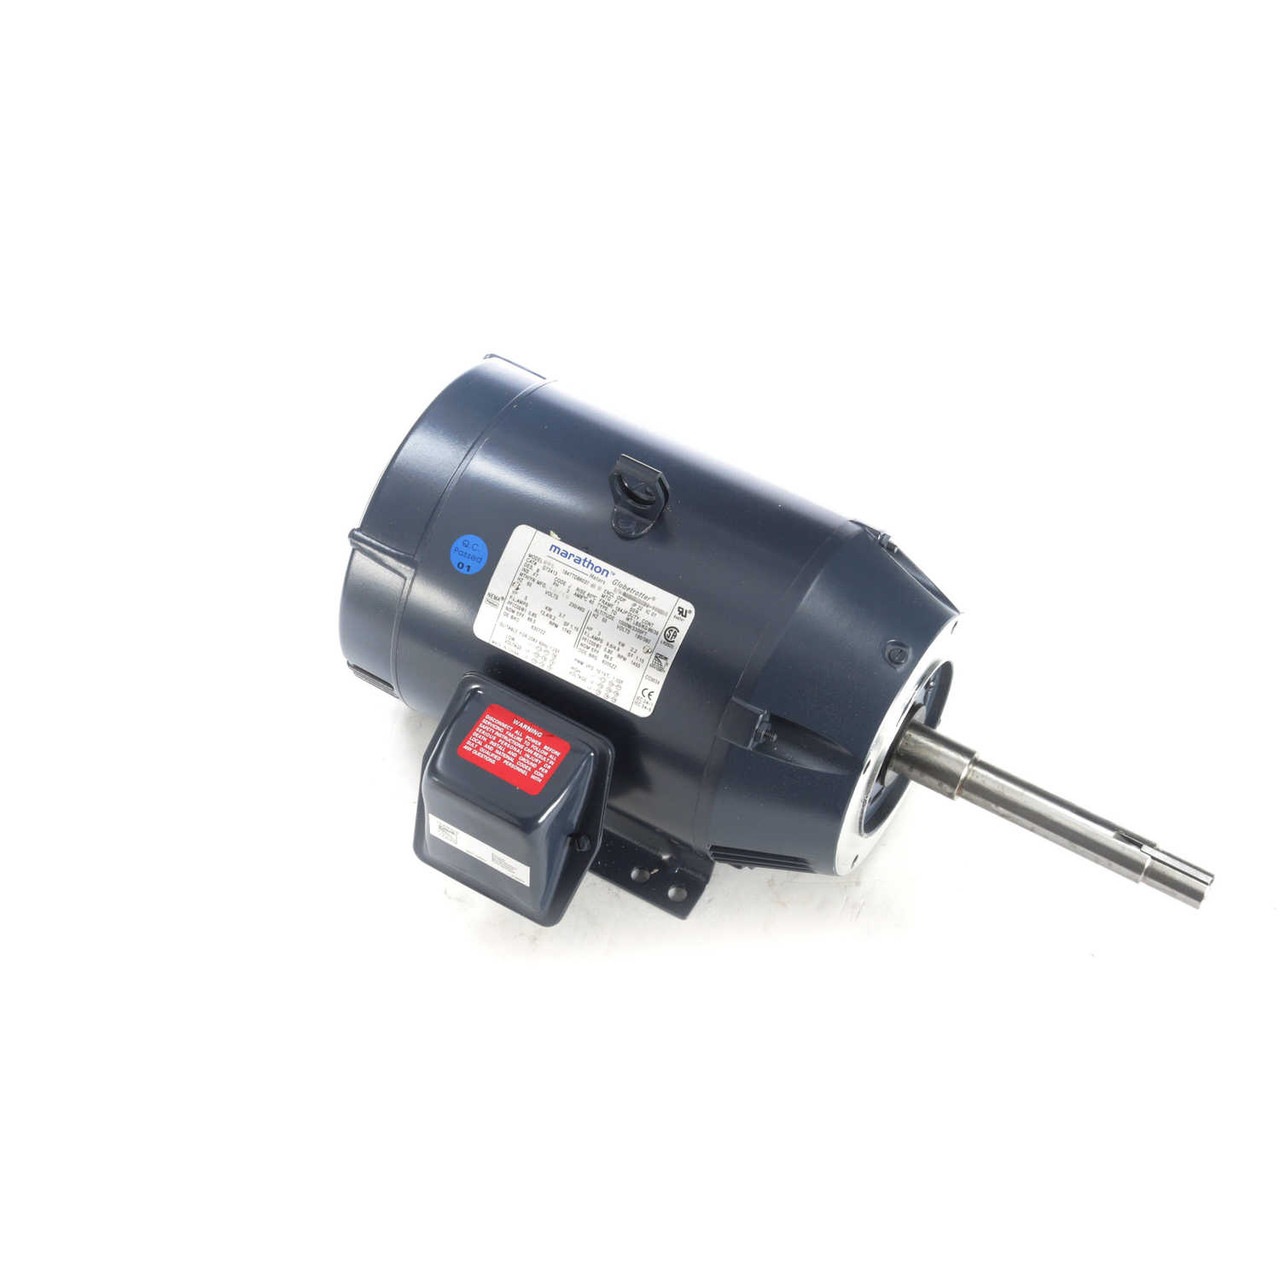 GT2413 JP Close-Coupled Pump Three Phase Dripproof Motor 5 HP